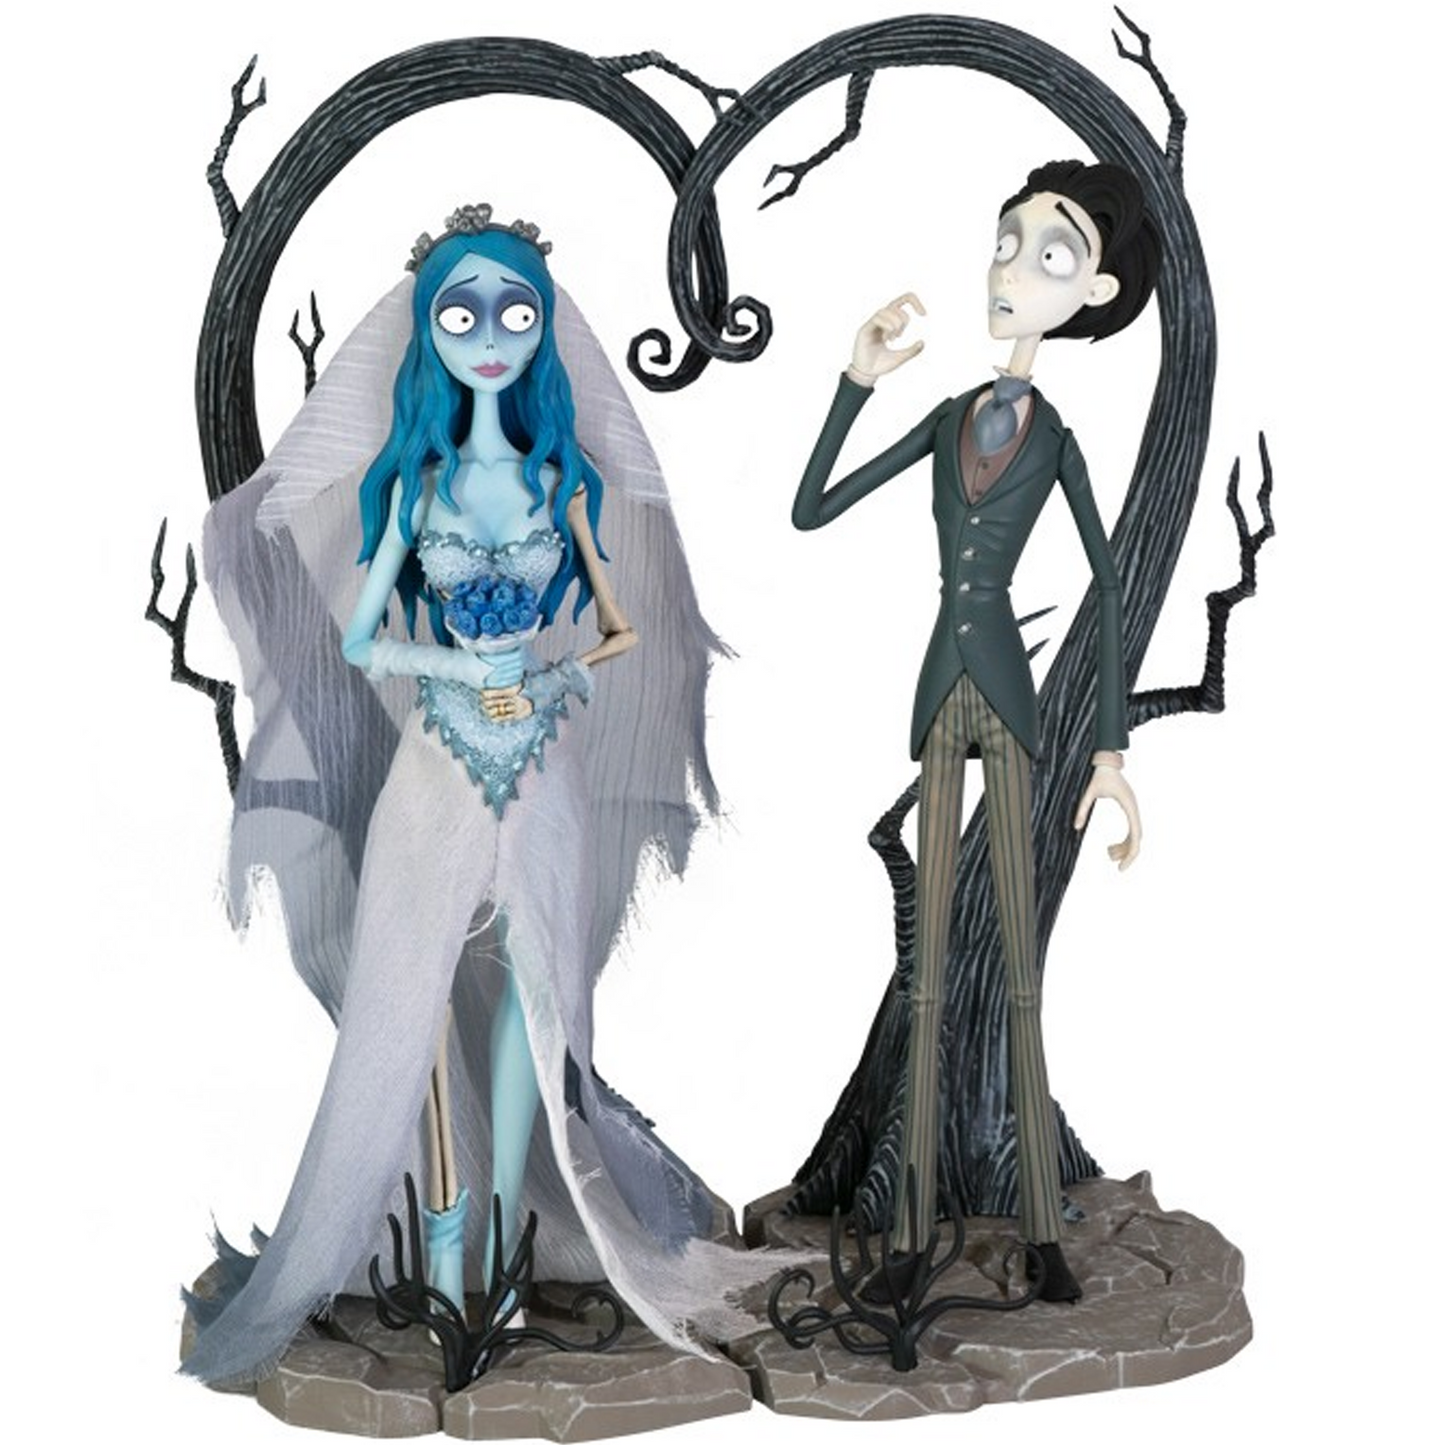 Corpse Bride - Victor 1:10 Scale Action Figure Next to the Emily Figure | Happy Piranha